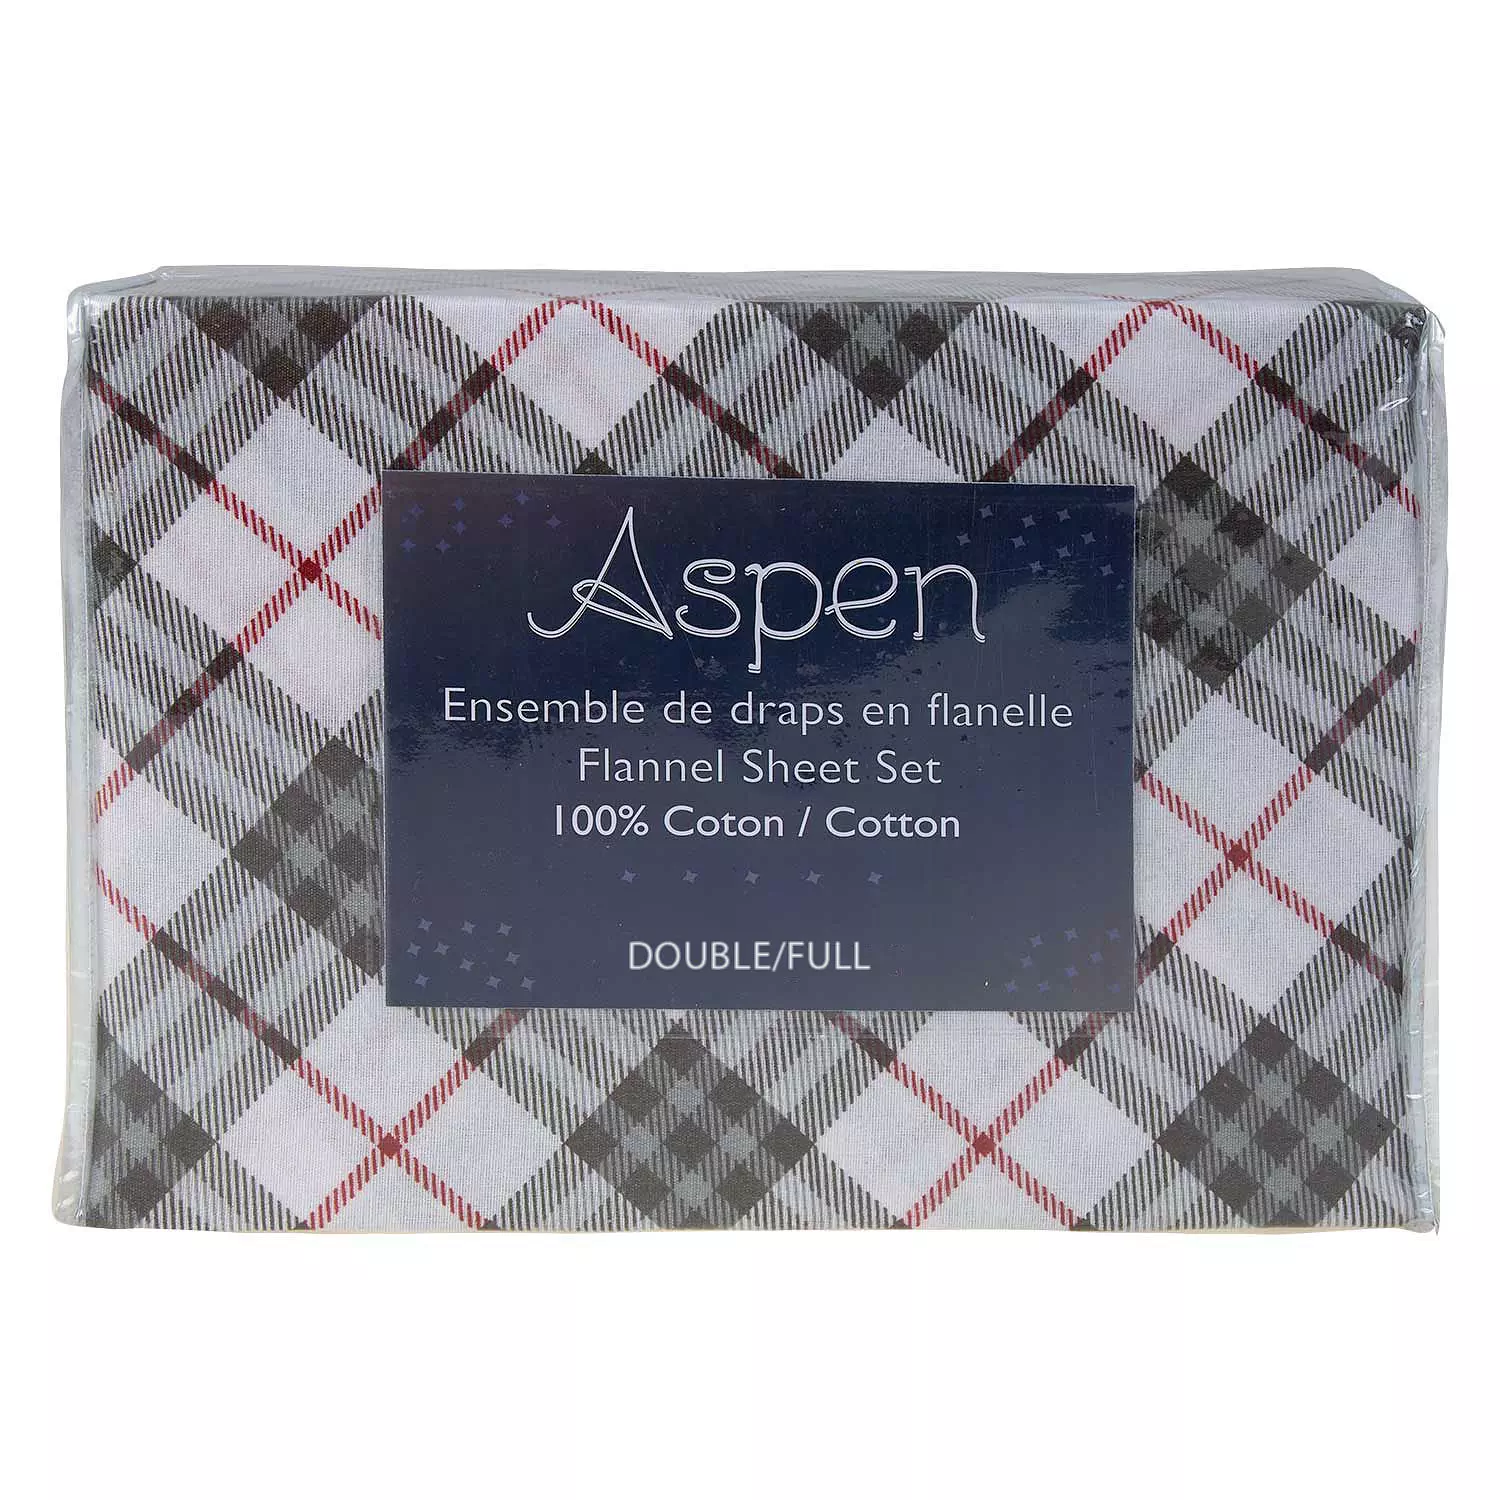 Plaid printed flannel sheet set, double